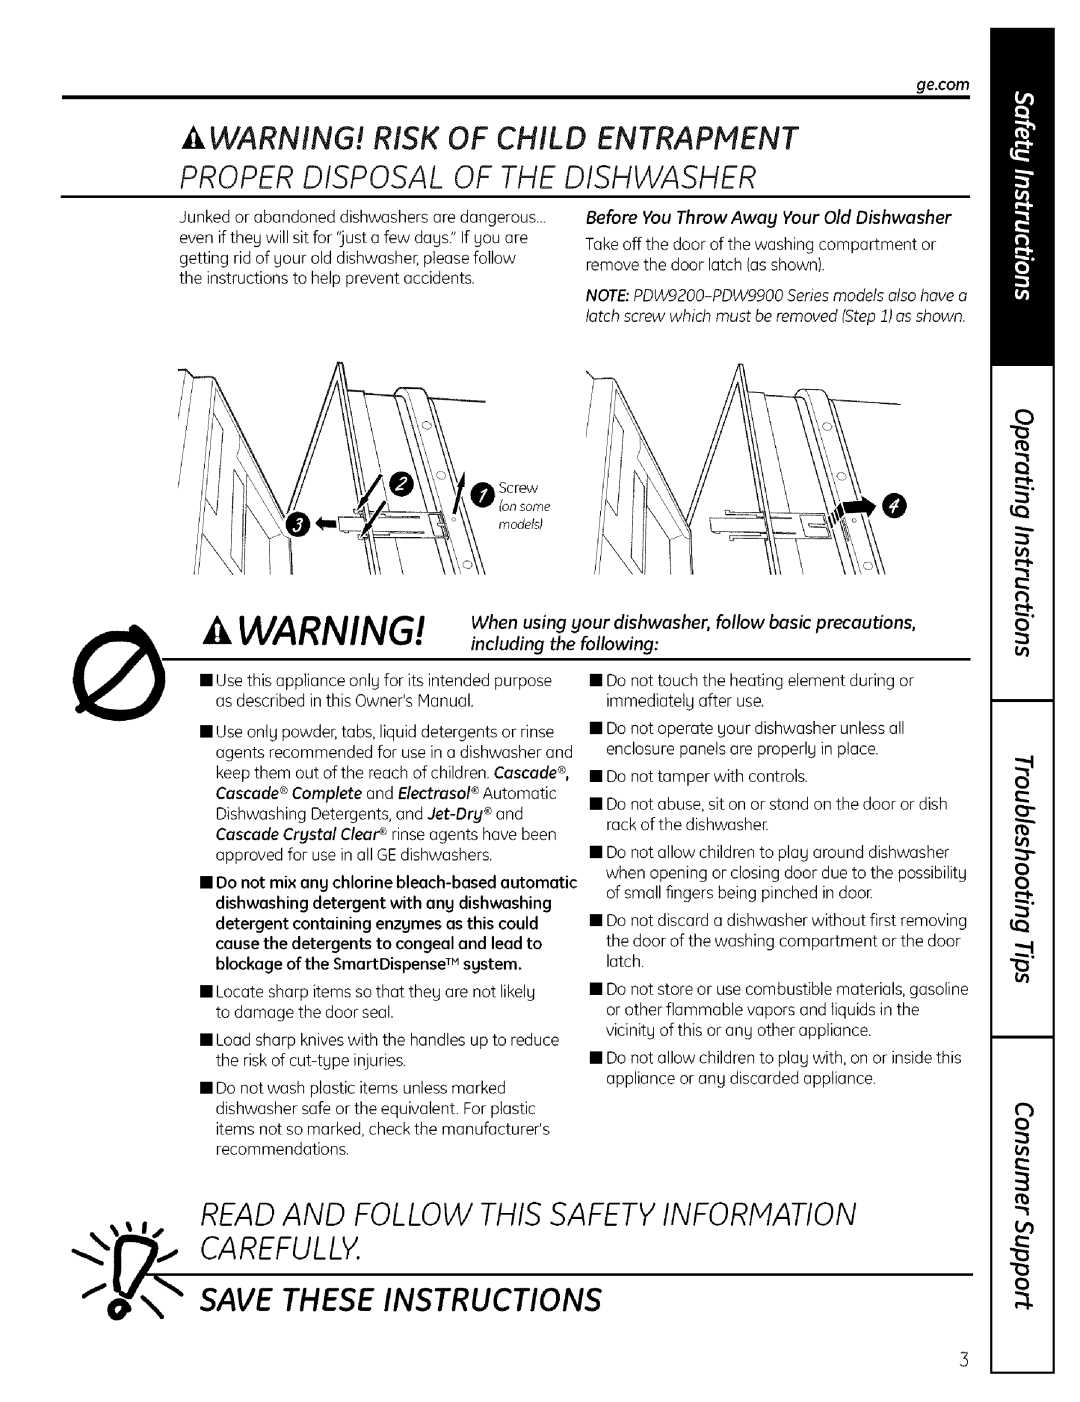 GE PDW9000 Readand Follow This Safetyinformation Carefully, Save These Instructions, A Warnin!! Risk Of Child Entrapment 